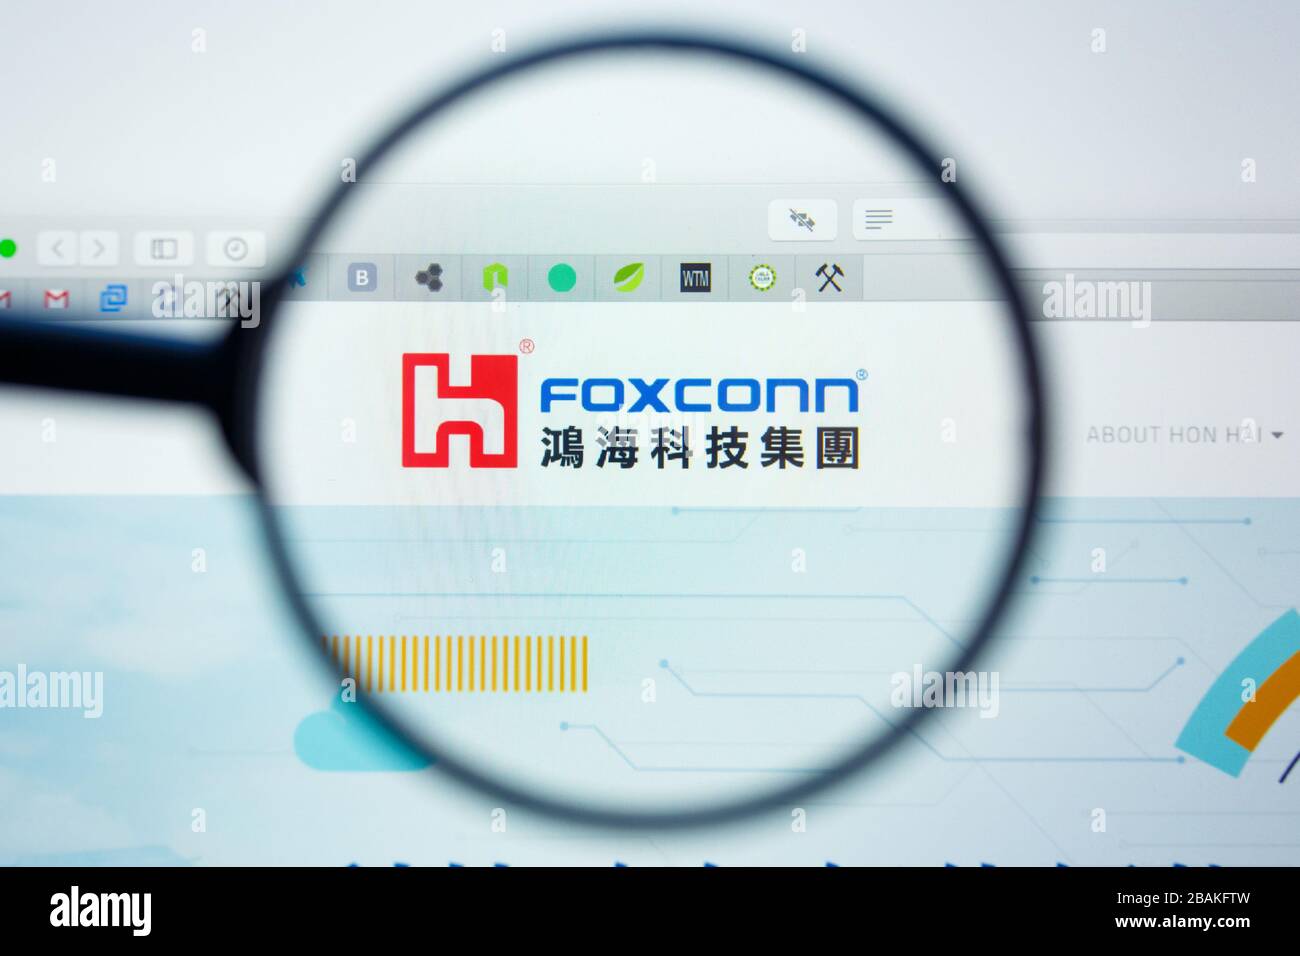 Los Angeles, California, USA - 12 June 2019: Illustrative Editorial of Foxconn website homepage. Foxconn logo visible on display screen Stock Photo